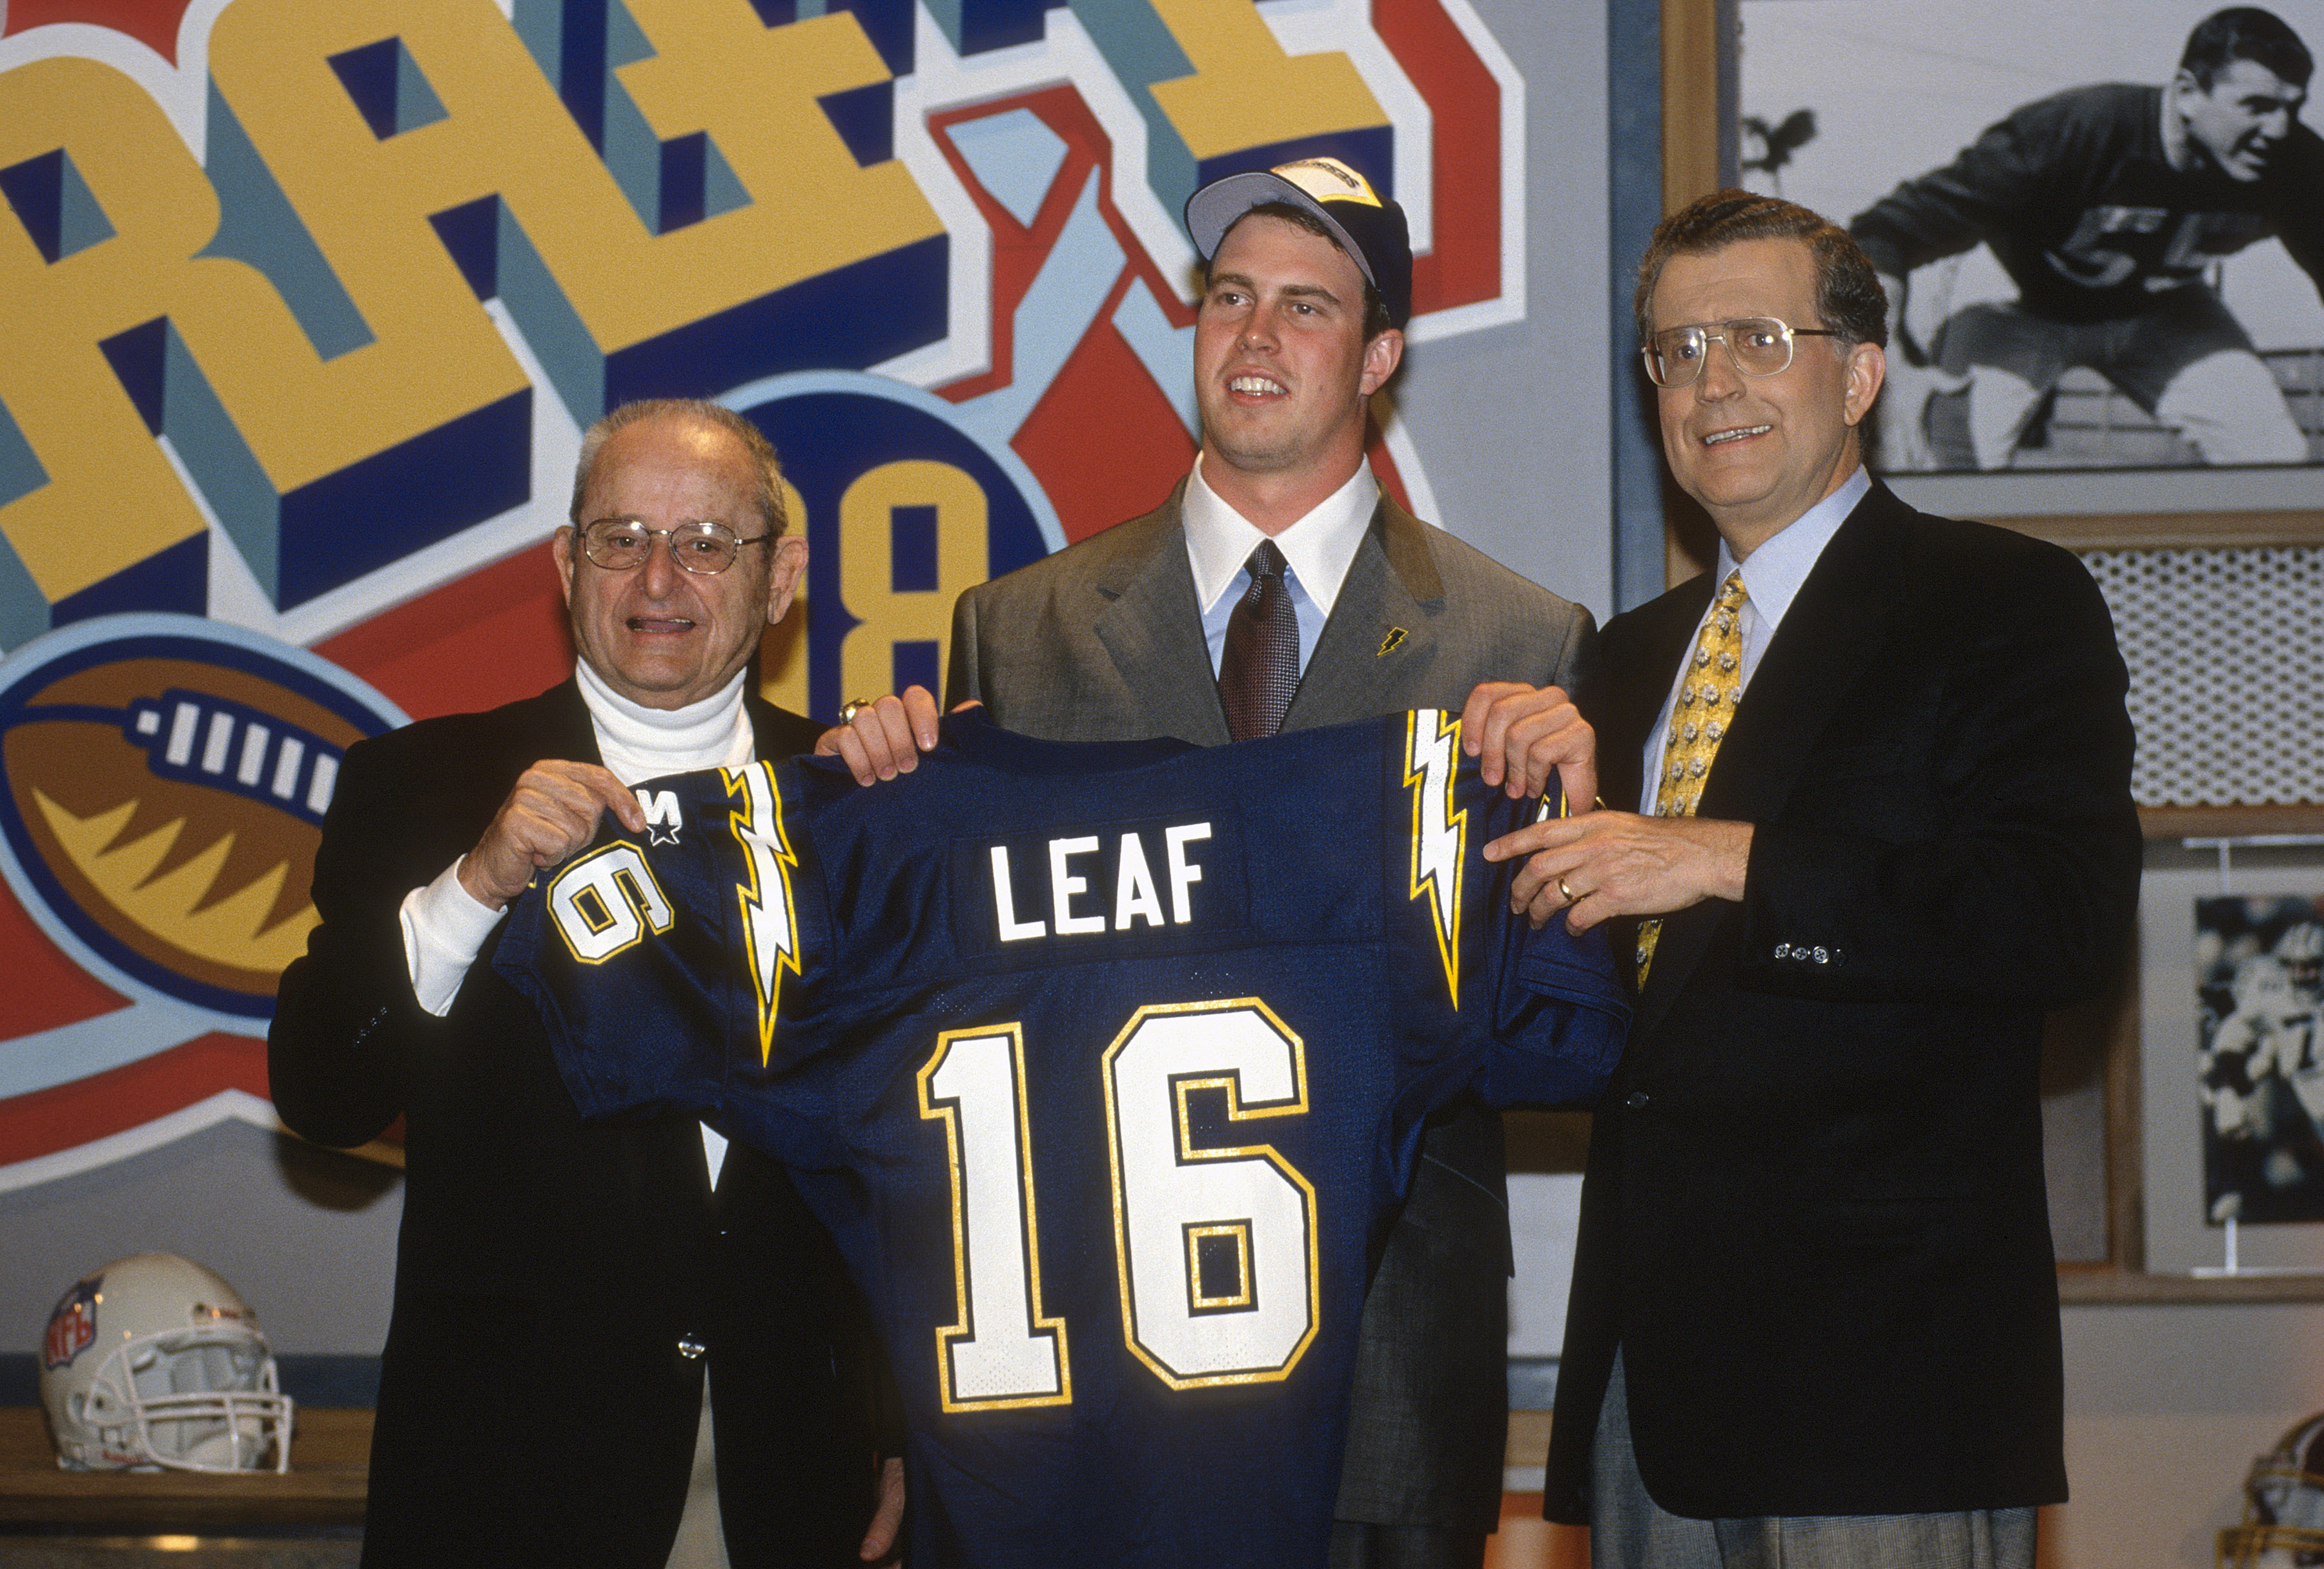 Ryan Leaf spoke about the "coolest thing" football ever gave him.